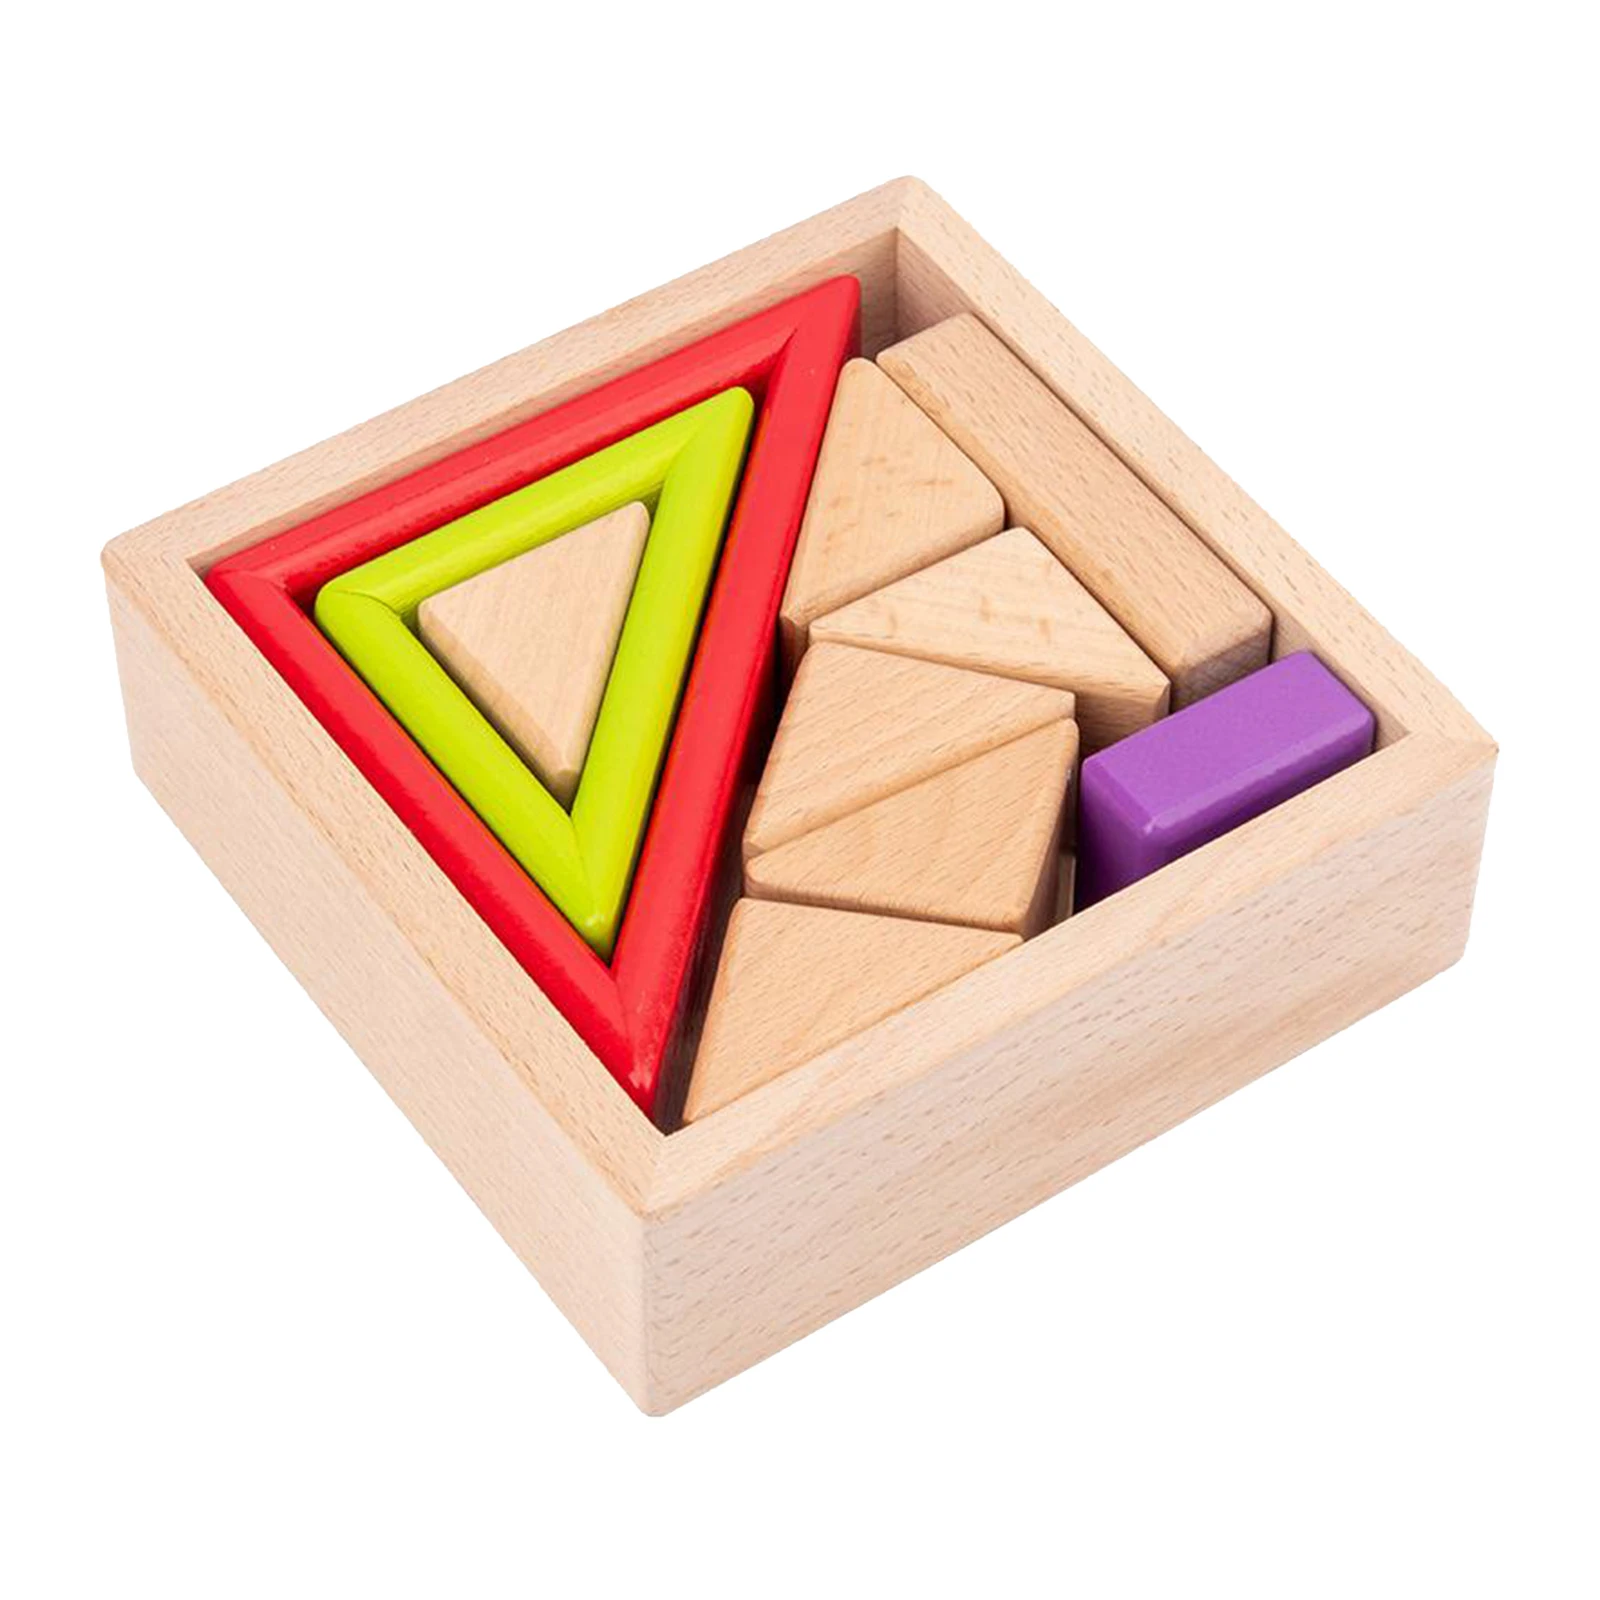 9PCS Wooden Toy Montessori Rainbow Building Blocks Stacking Game Blocks Early Educational Toy For Children